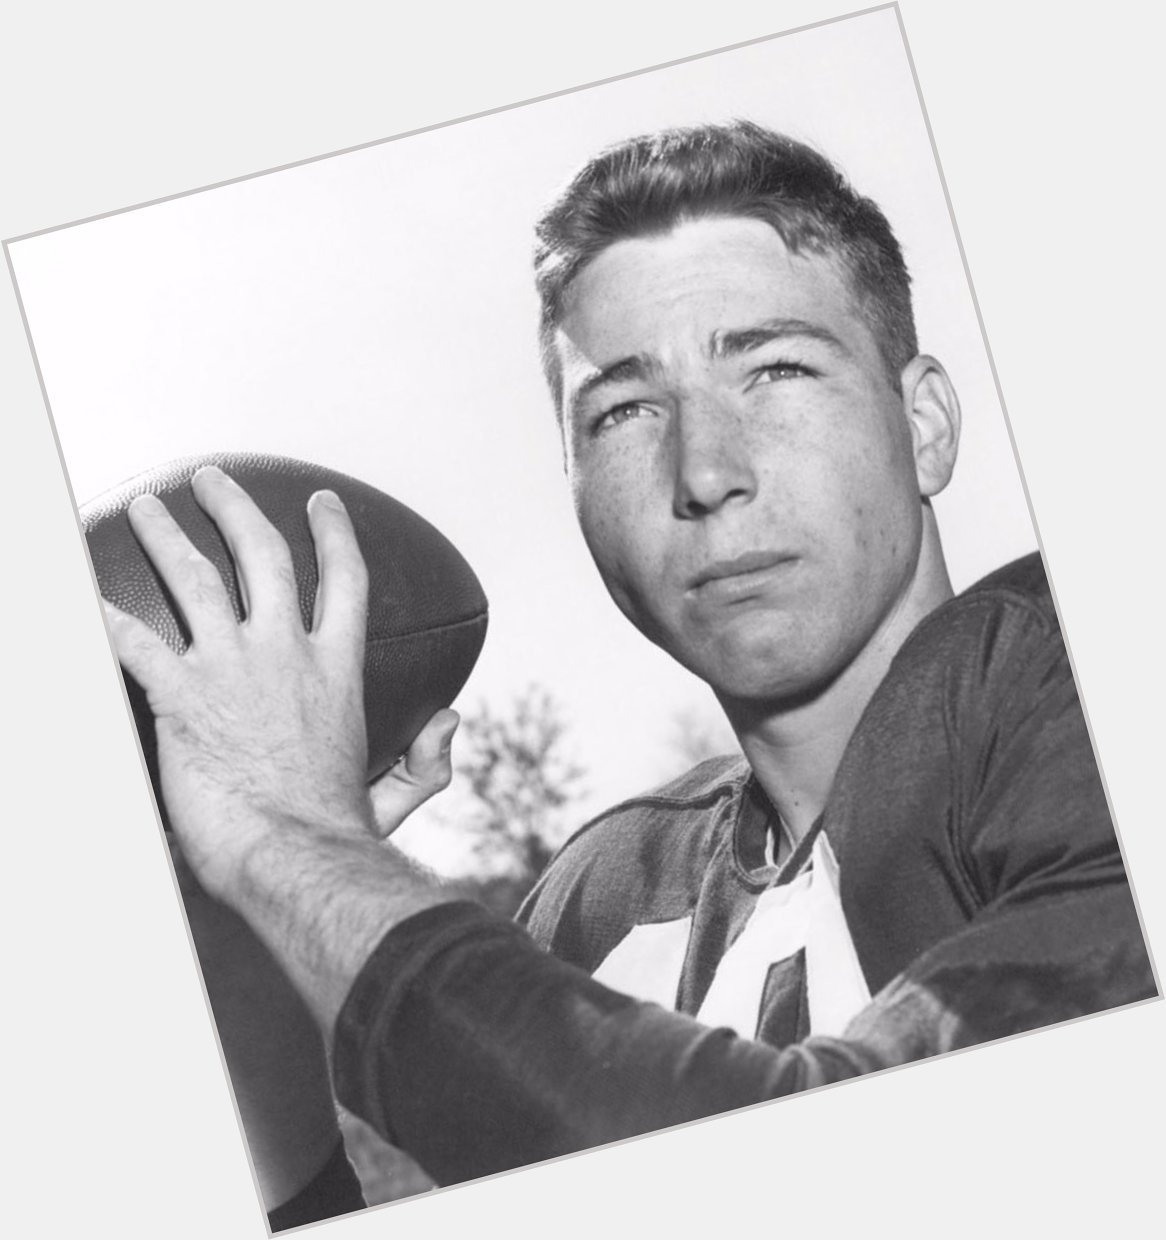 Heroes are hard to find
Happy Birthday to Bart Starr 